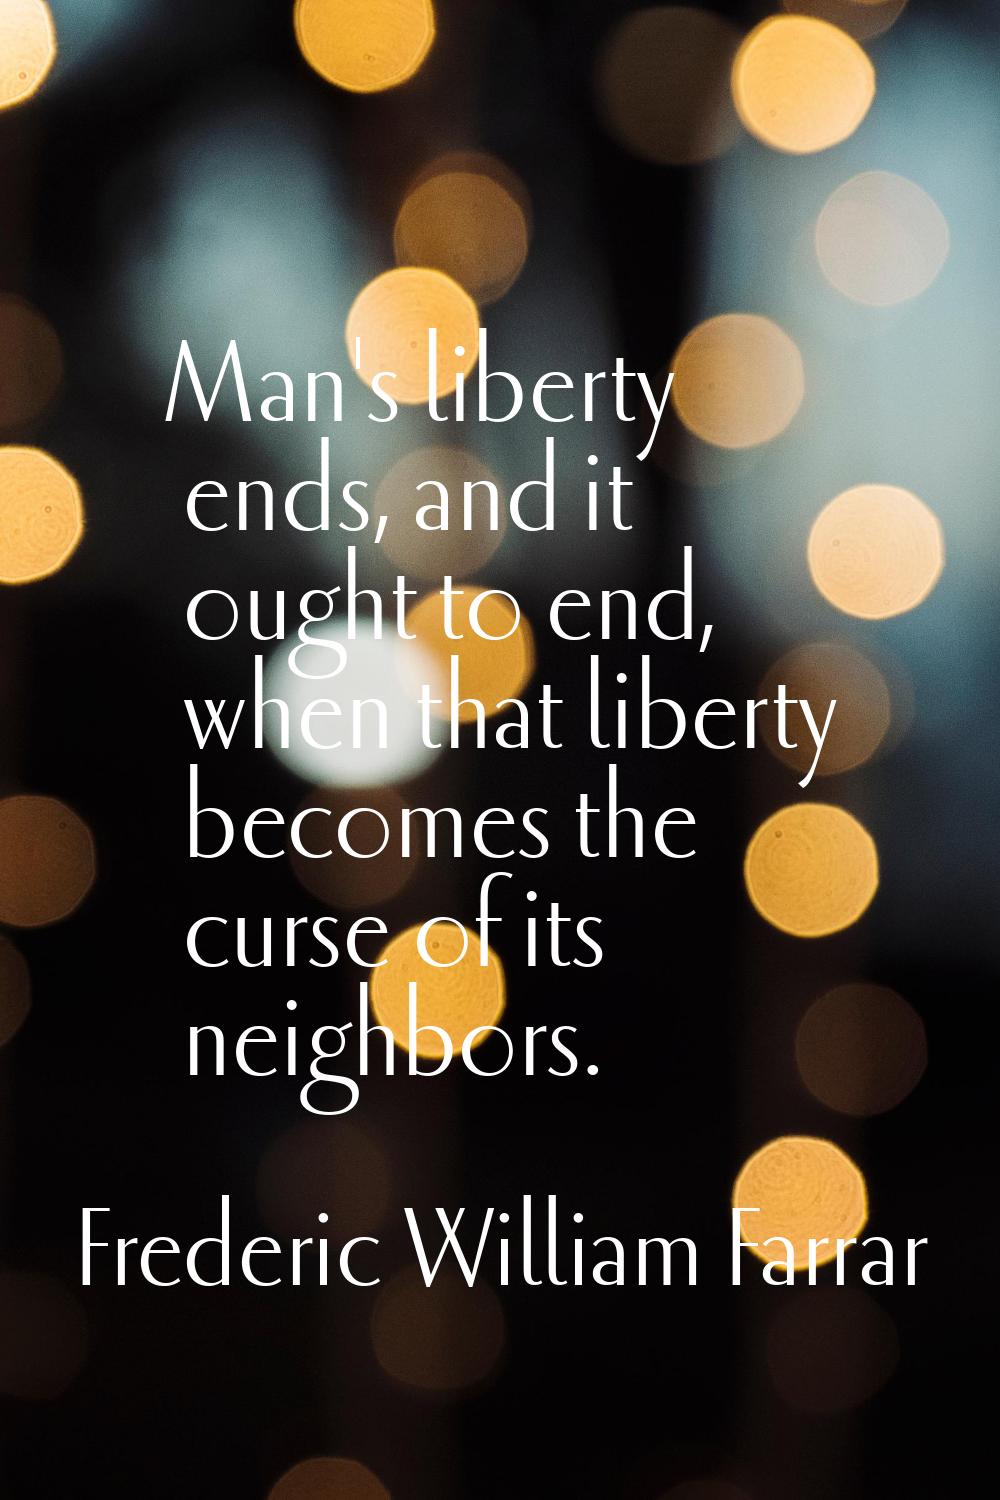 Man's liberty ends, and it ought to end, when that liberty becomes the curse of its neighbors.